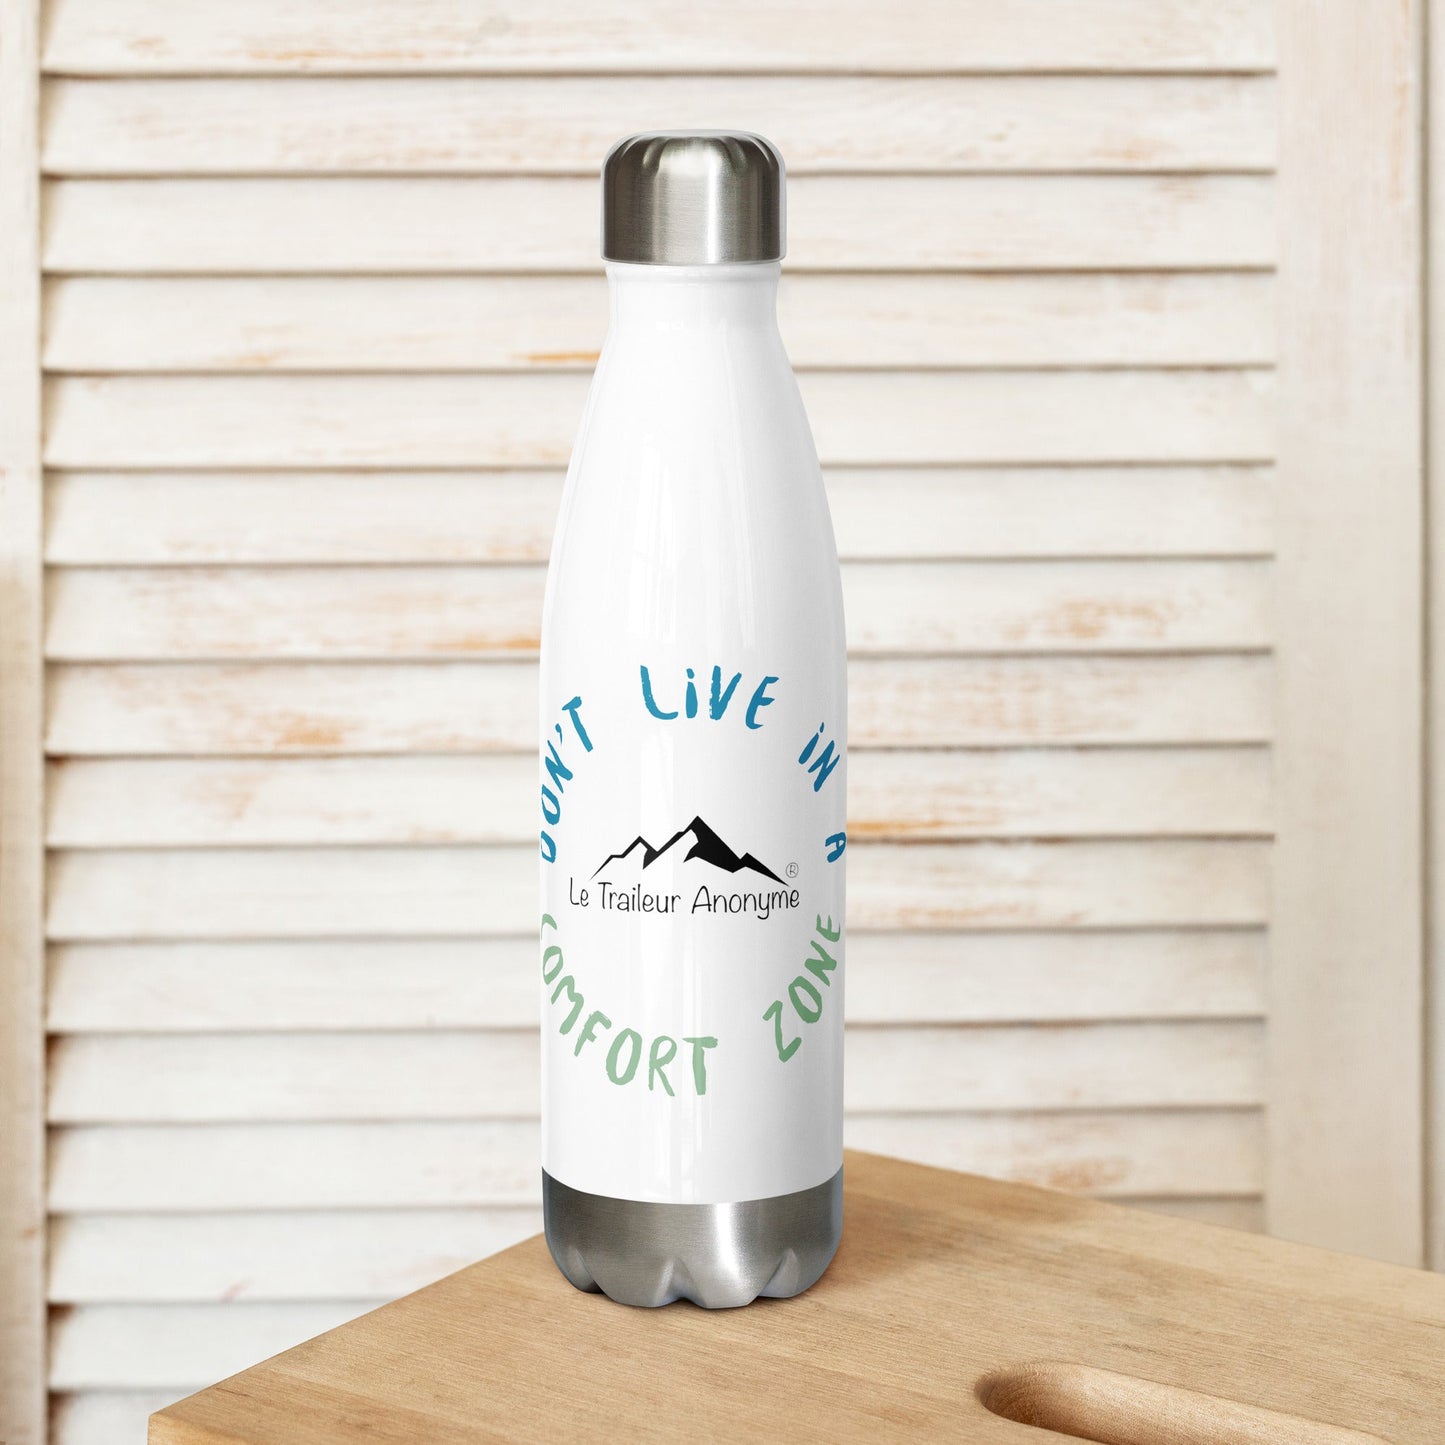 Gourde isotherme "Don't live in a comfort zone" - 500ml (#70) - Le Traileur Anonyme